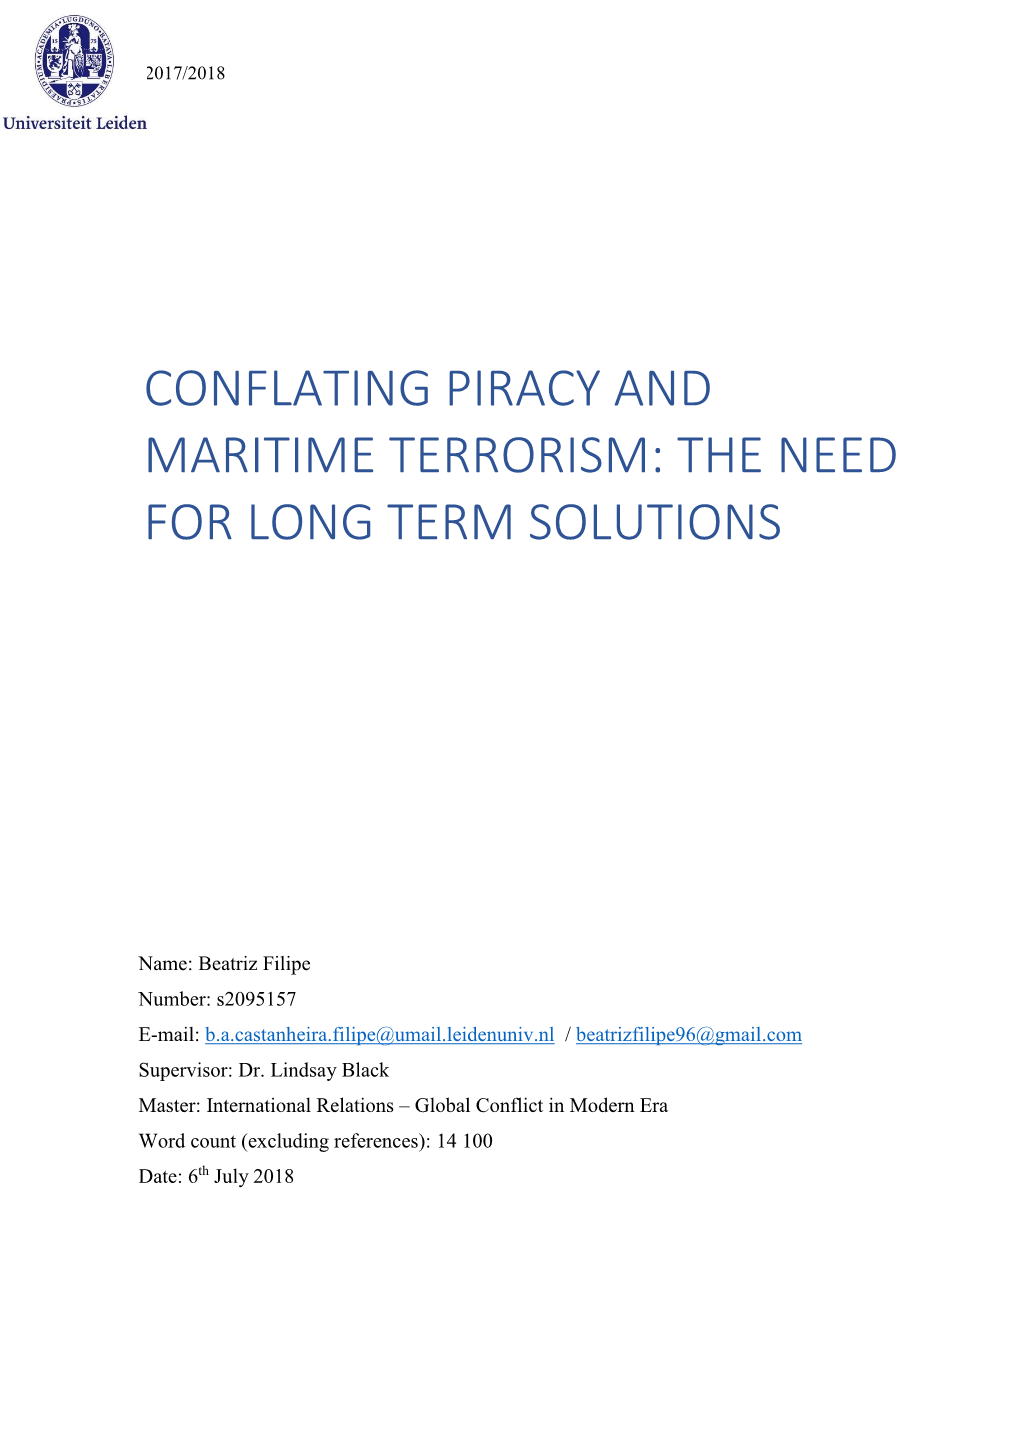 Conflating Piracy and Maritime Terrorism: the Need for Long Term Solutions